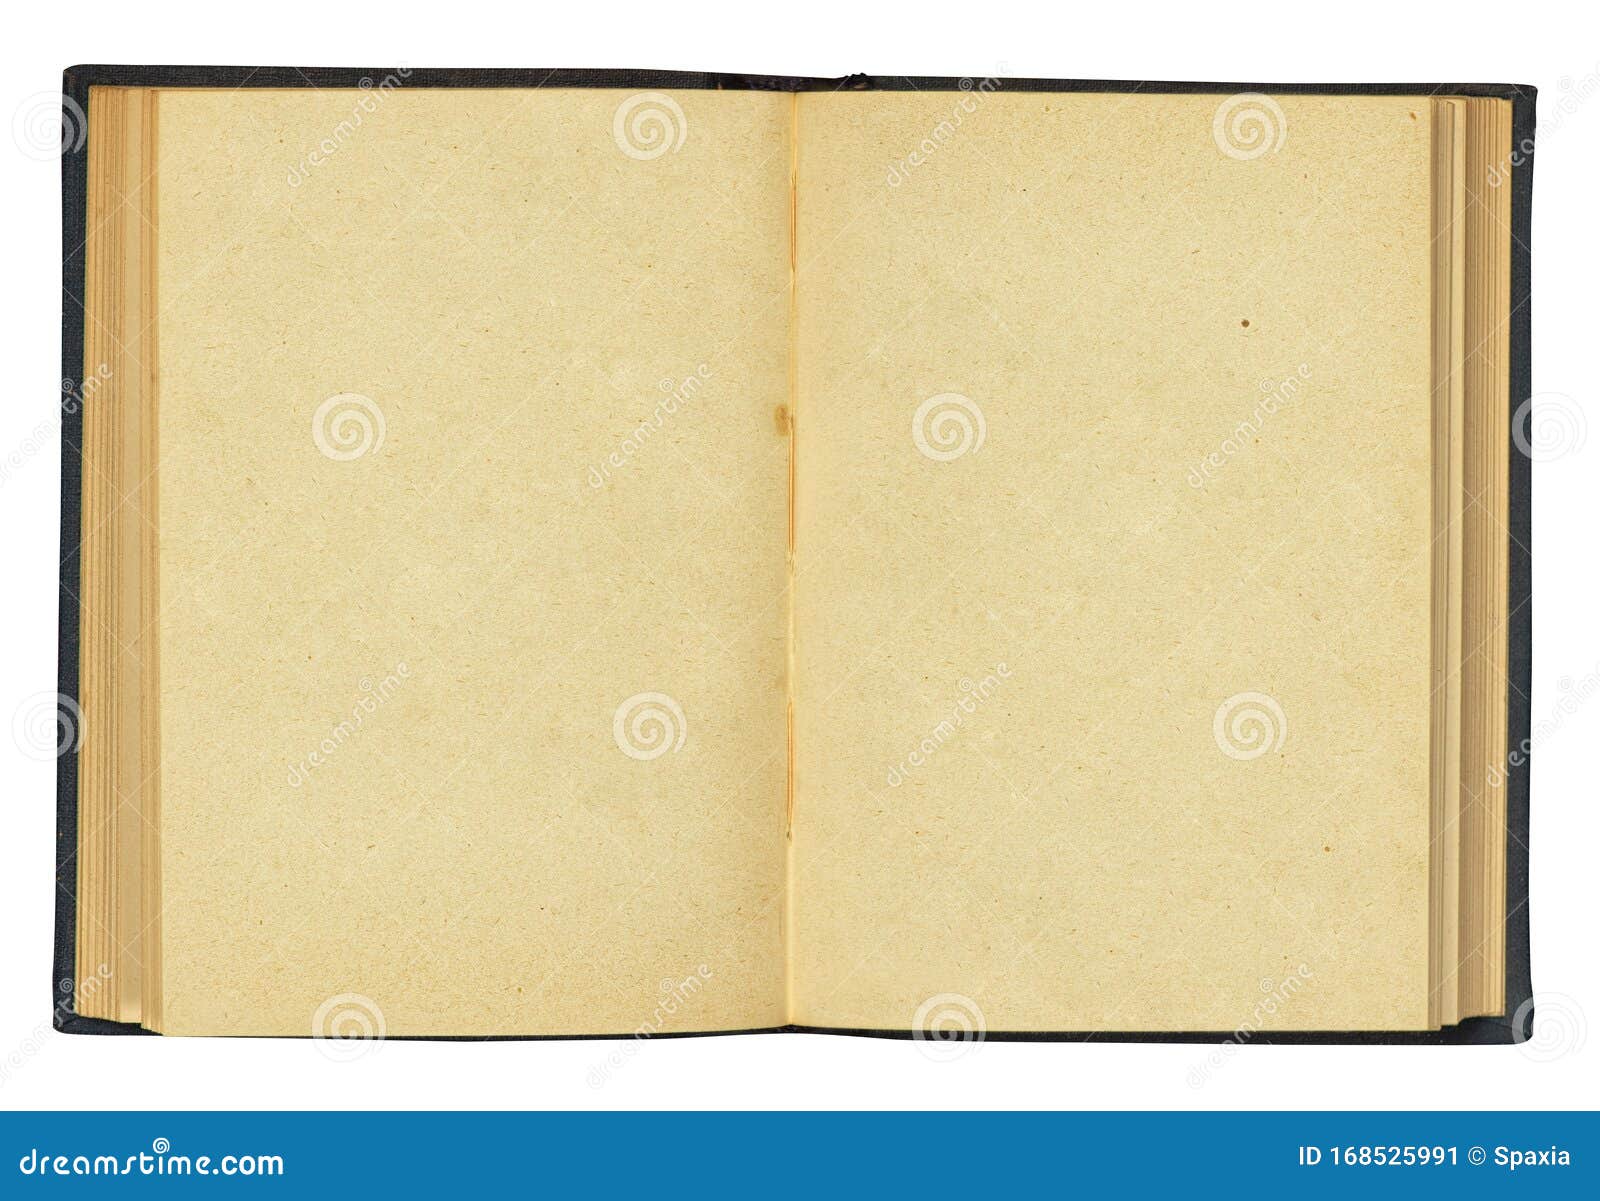 5,129 Open Blank Sketchbook Stock Photos - Free & Royalty-Free